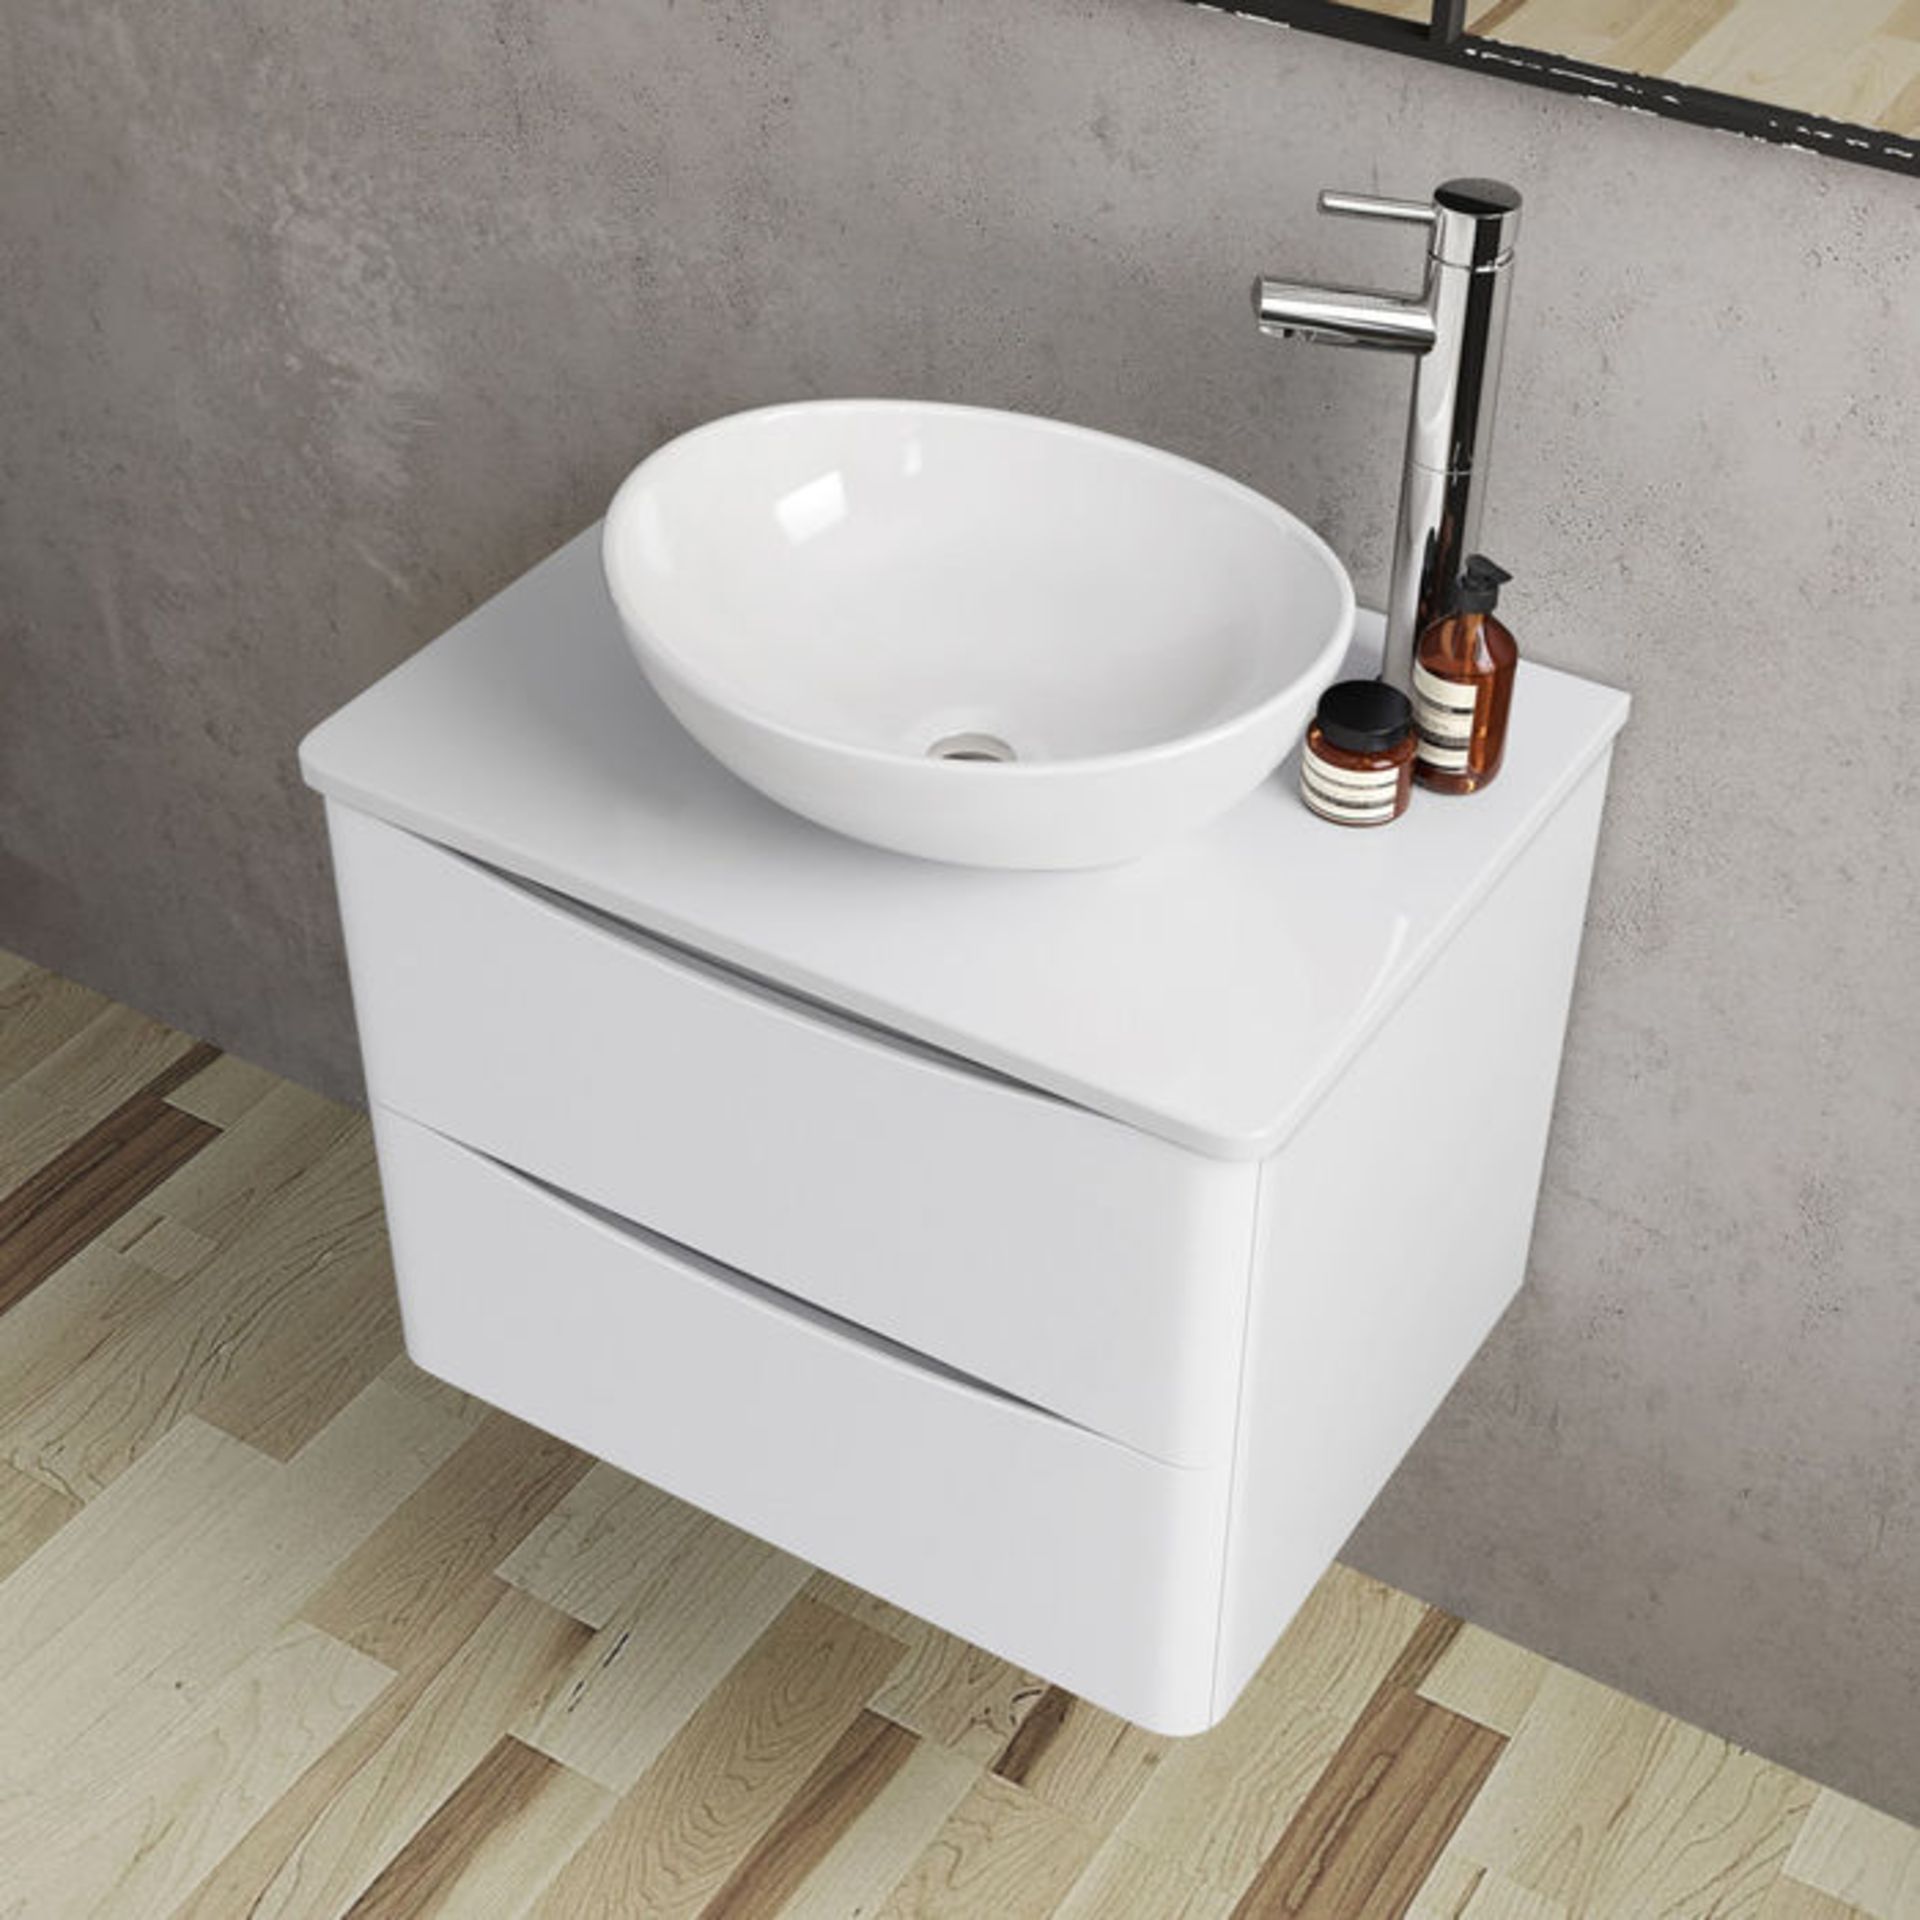 NEW 600mm Austin II Gloss White Countertop Unit and Camila Basin - Wall Hung. RRP £849.99.Come... - Image 2 of 3